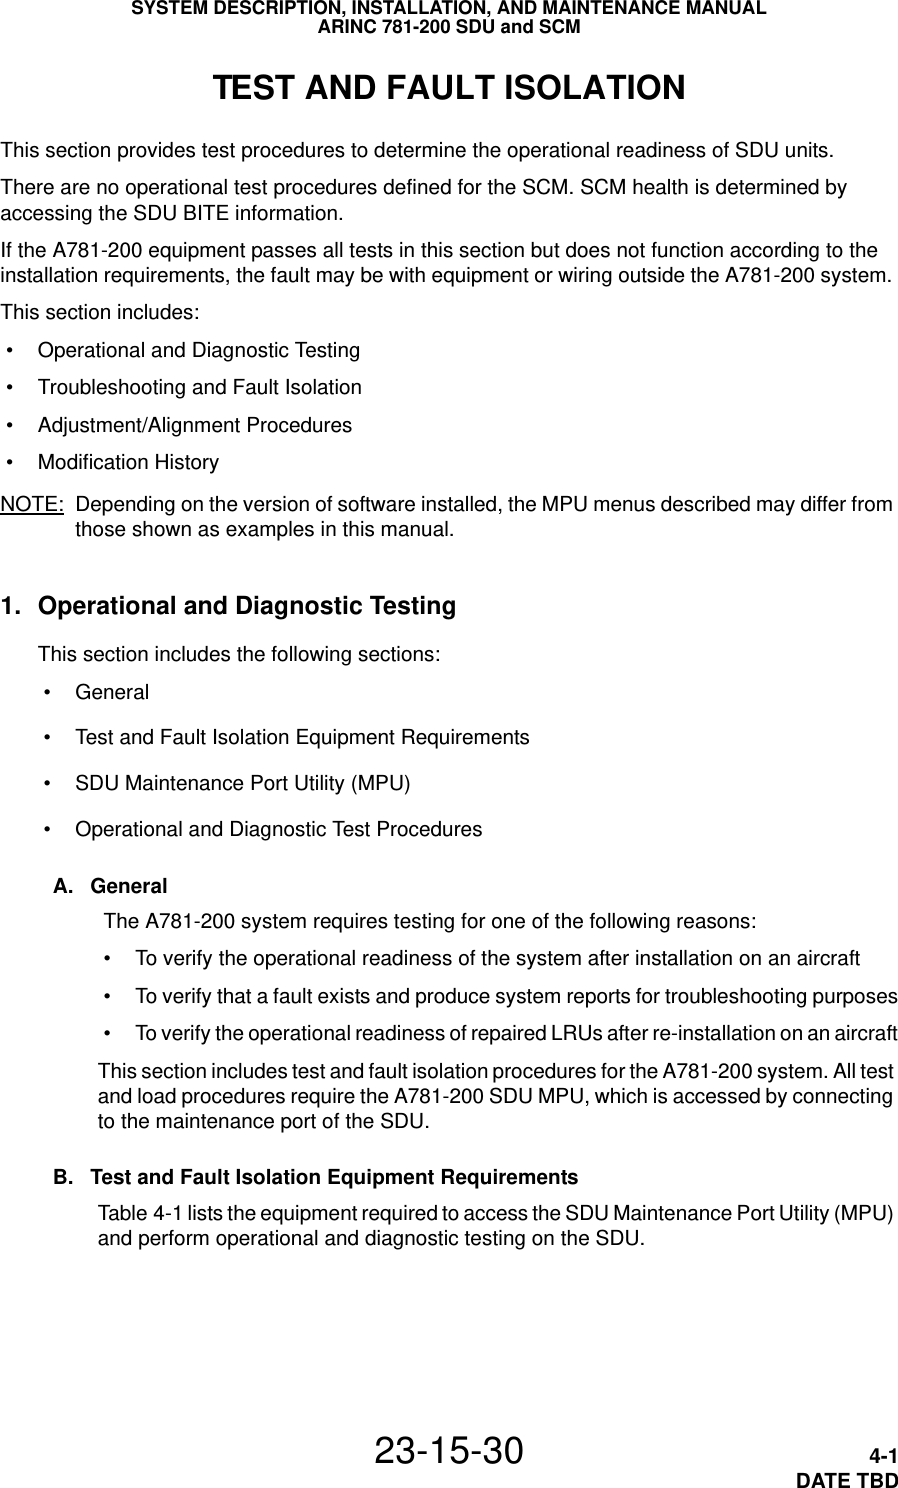 SYSTEM DESCRIPTION, INSTALLATION, AND MAINTENANCE MANUALARINC 781-200 SDU and SCM23-15-30 4-1DATE TBDTEST AND FAULT ISOLATIONThis section provides test procedures to determine the operational readiness of SDU units.There are no operational test procedures defined for the SCM. SCM health is determined by accessing the SDU BITE information.If the A781-200 equipment passes all tests in this section but does not function according to the installation requirements, the fault may be with equipment or wiring outside the A781-200 system. This section includes: • Operational and Diagnostic Testing • Troubleshooting and Fault Isolation • Adjustment/Alignment Procedures • Modification History NOTE: Depending on the version of software installed, the MPU menus described may differ from those shown as examples in this manual.1. Operational and Diagnostic TestingThis section includes the following sections: • General • Test and Fault Isolation Equipment Requirements • SDU Maintenance Port Utility (MPU) • Operational and Diagnostic Test ProceduresA. General The A781-200 system requires testing for one of the following reasons: • To verify the operational readiness of the system after installation on an aircraft • To verify that a fault exists and produce system reports for troubleshooting purposes • To verify the operational readiness of repaired LRUs after re-installation on an aircraftThis section includes test and fault isolation procedures for the A781-200 system. All test and load procedures require the A781-200 SDU MPU, which is accessed by connecting to the maintenance port of the SDU. B. Test and Fault Isolation Equipment RequirementsTable 4-1 lists the equipment required to access the SDU Maintenance Port Utility (MPU) and perform operational and diagnostic testing on the SDU. 